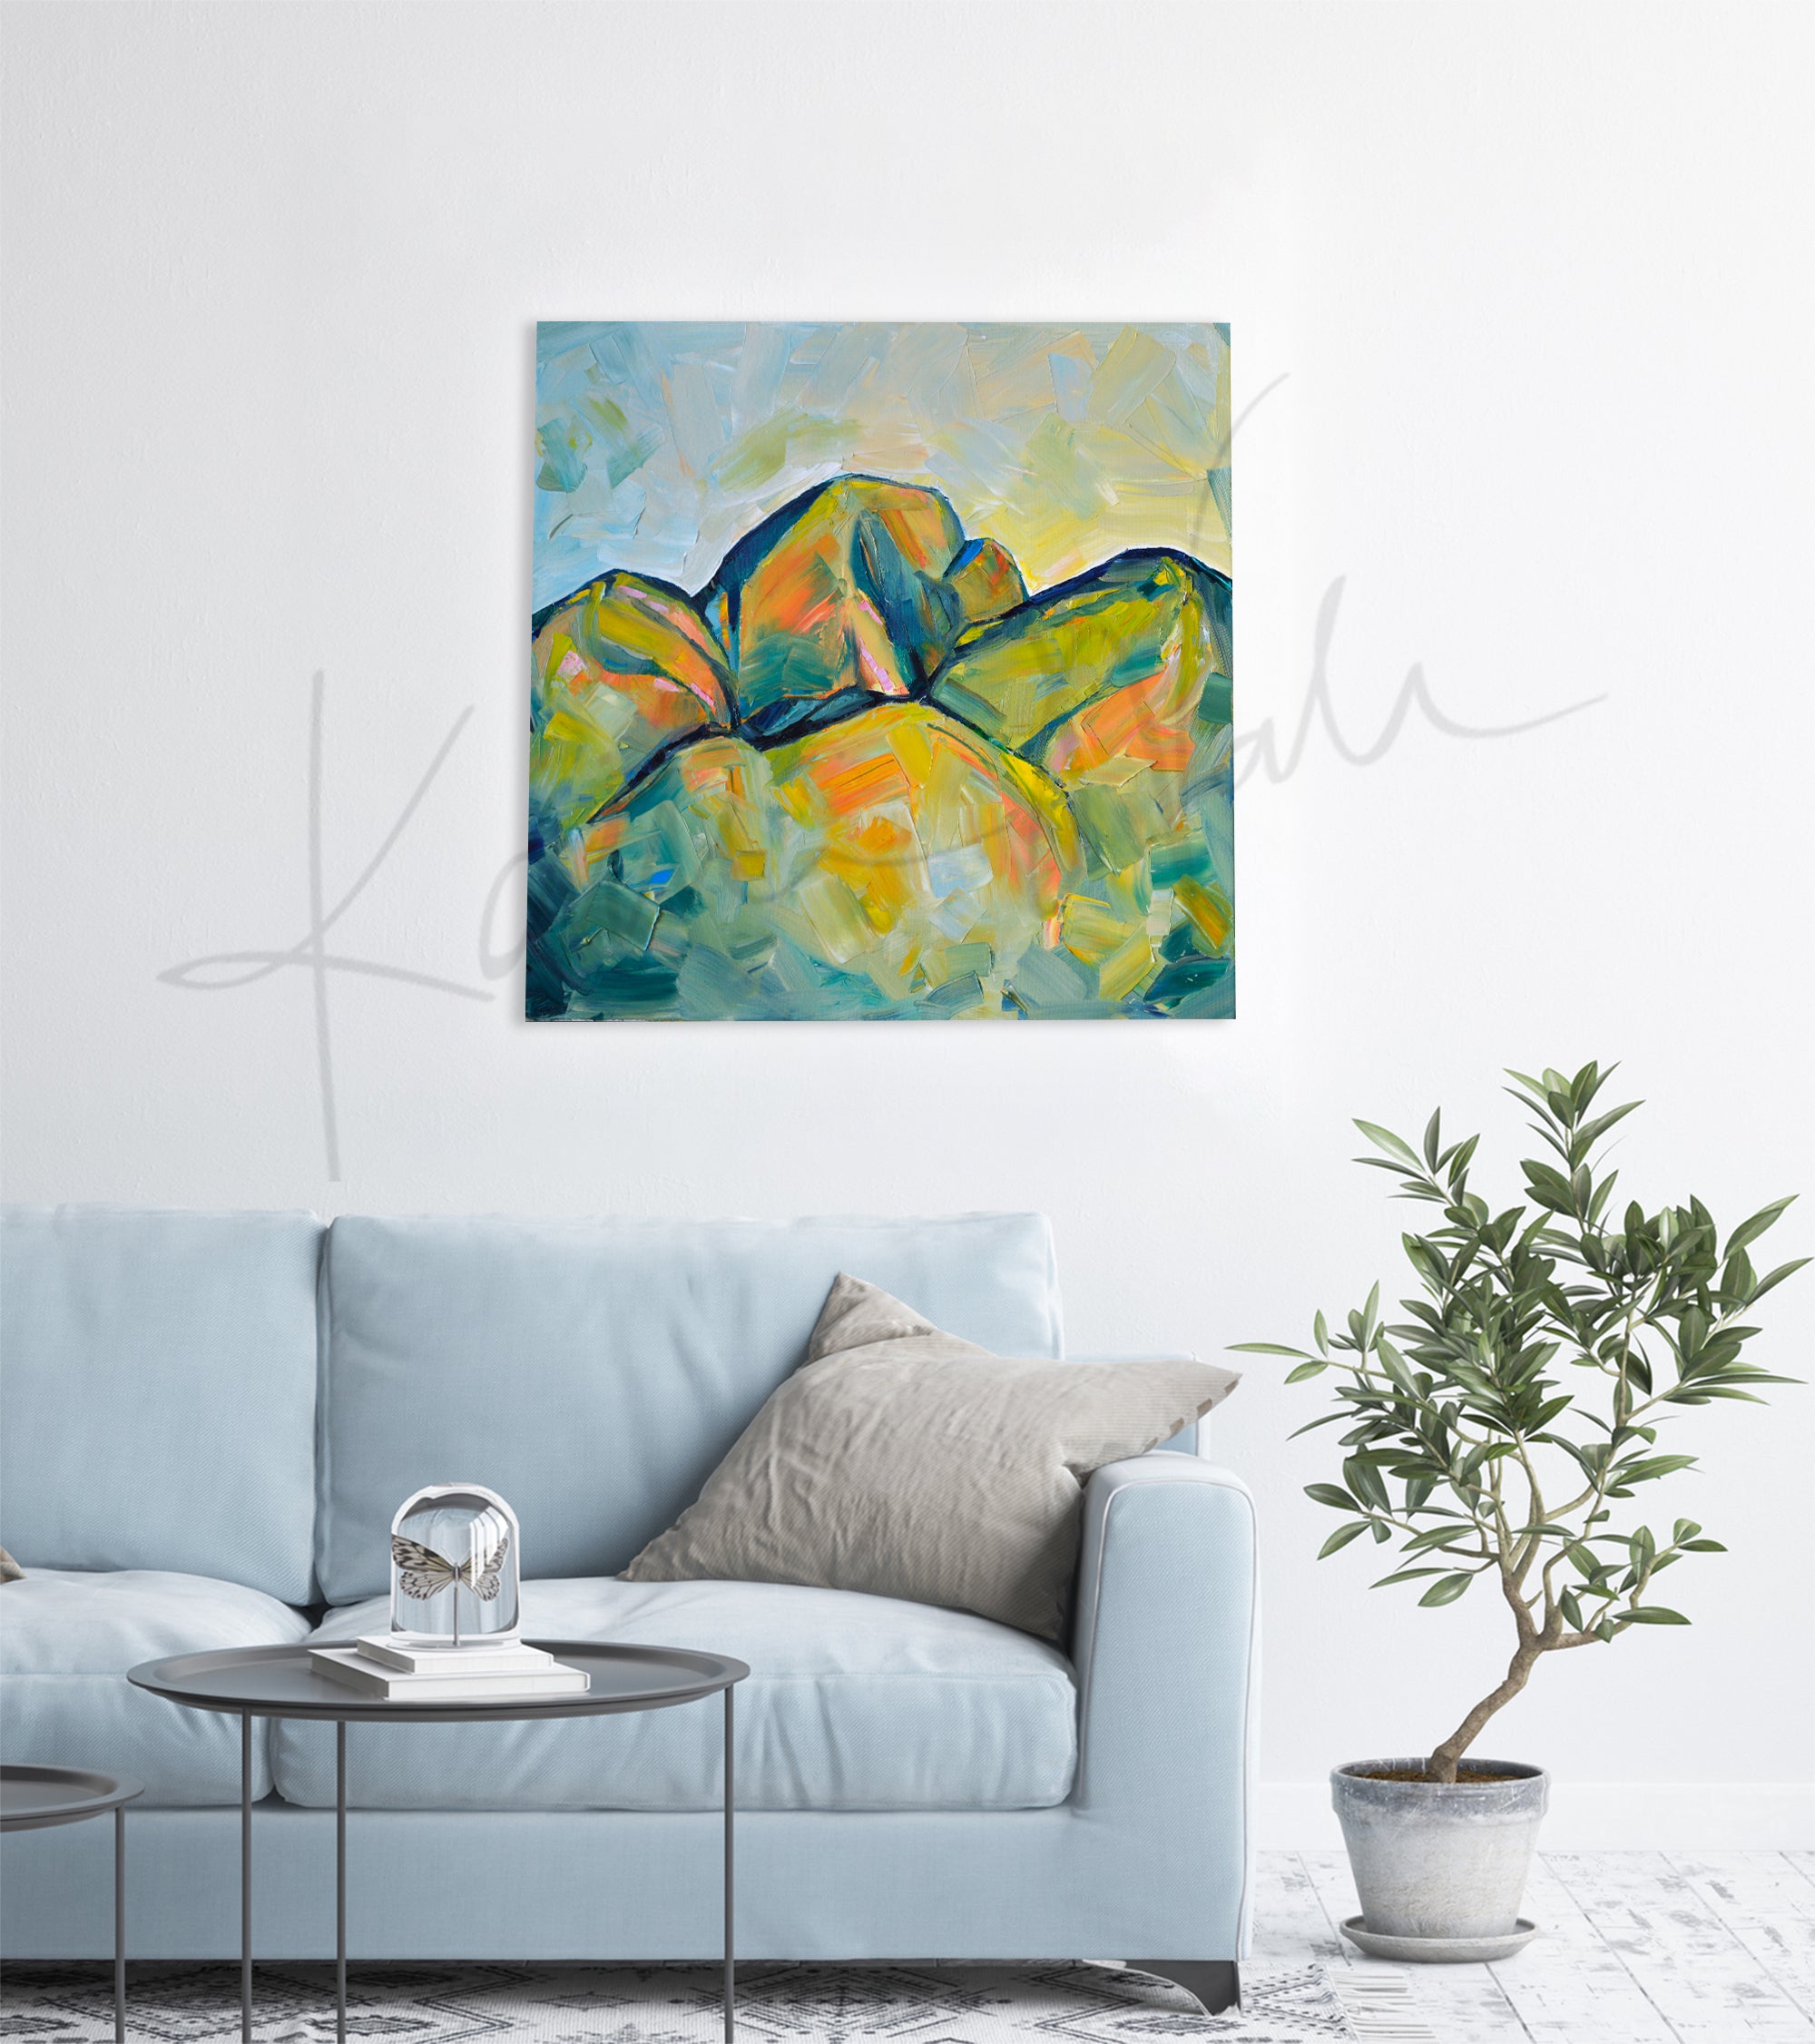 Oil painting of an abstract molar tooth painted to look like mountains. The painting is hanging over a blue couch.